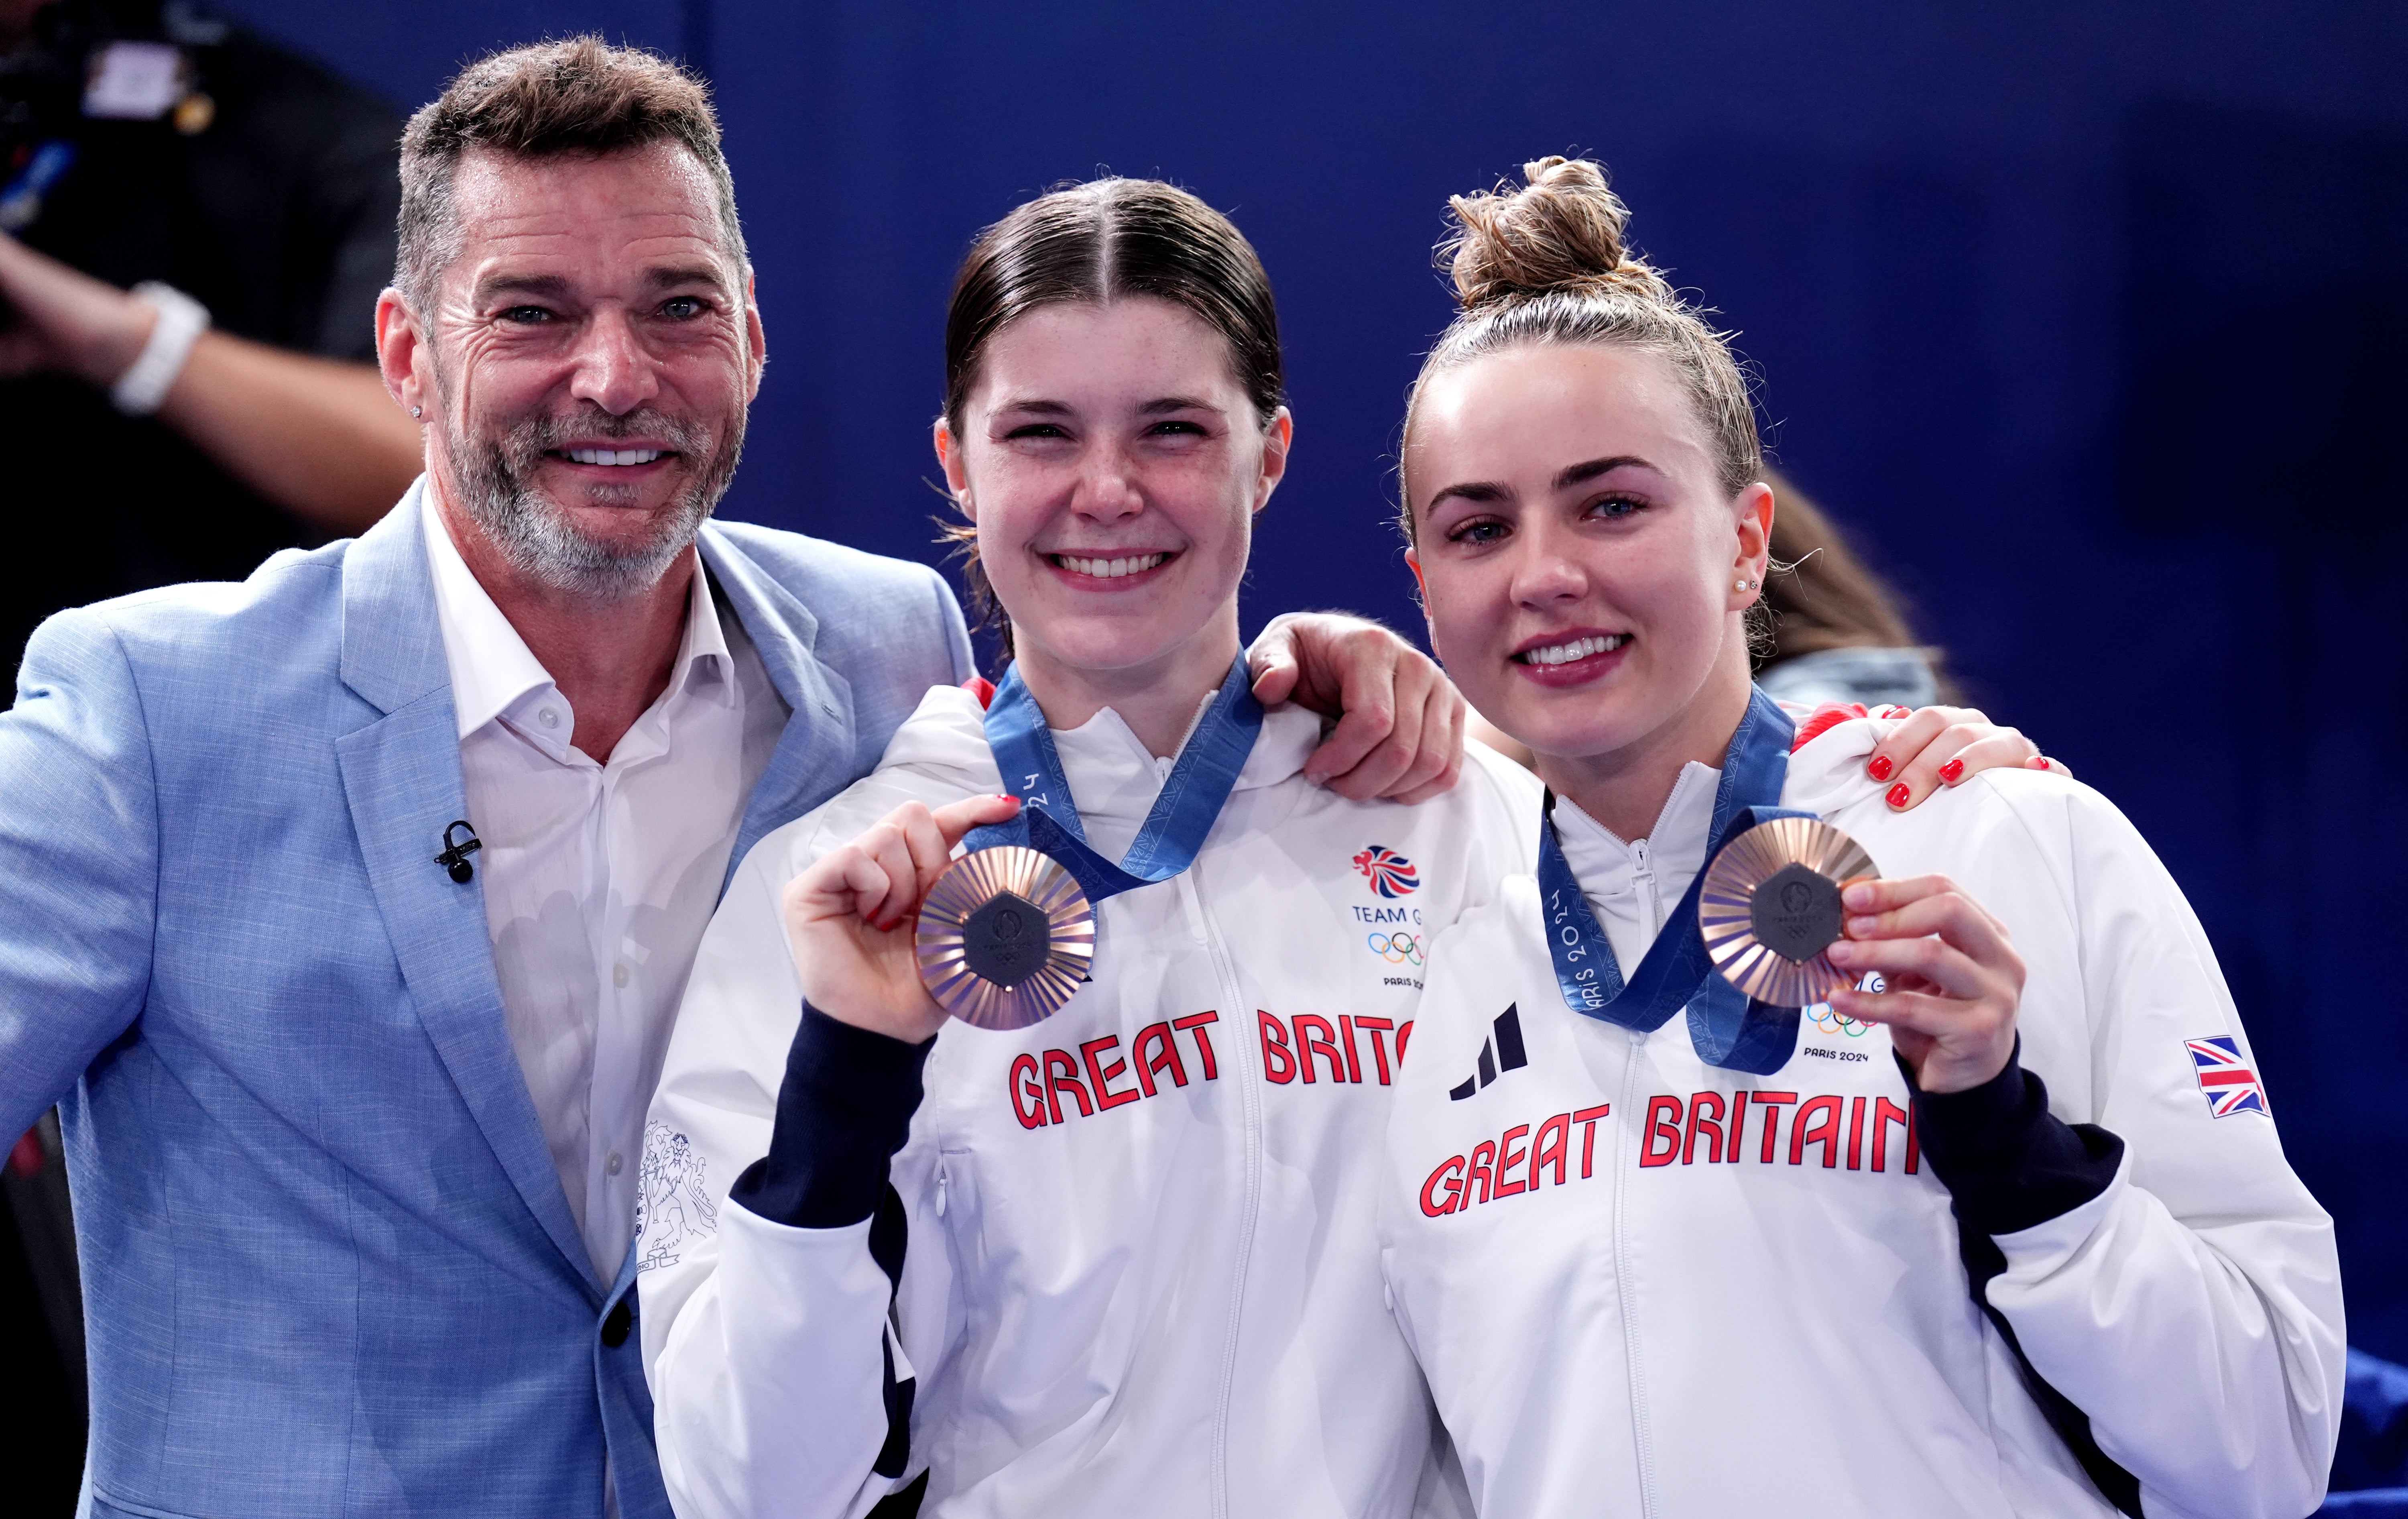 Fred Sirieix watched his daughter Andrea compete at the Paris 2024 Olympics